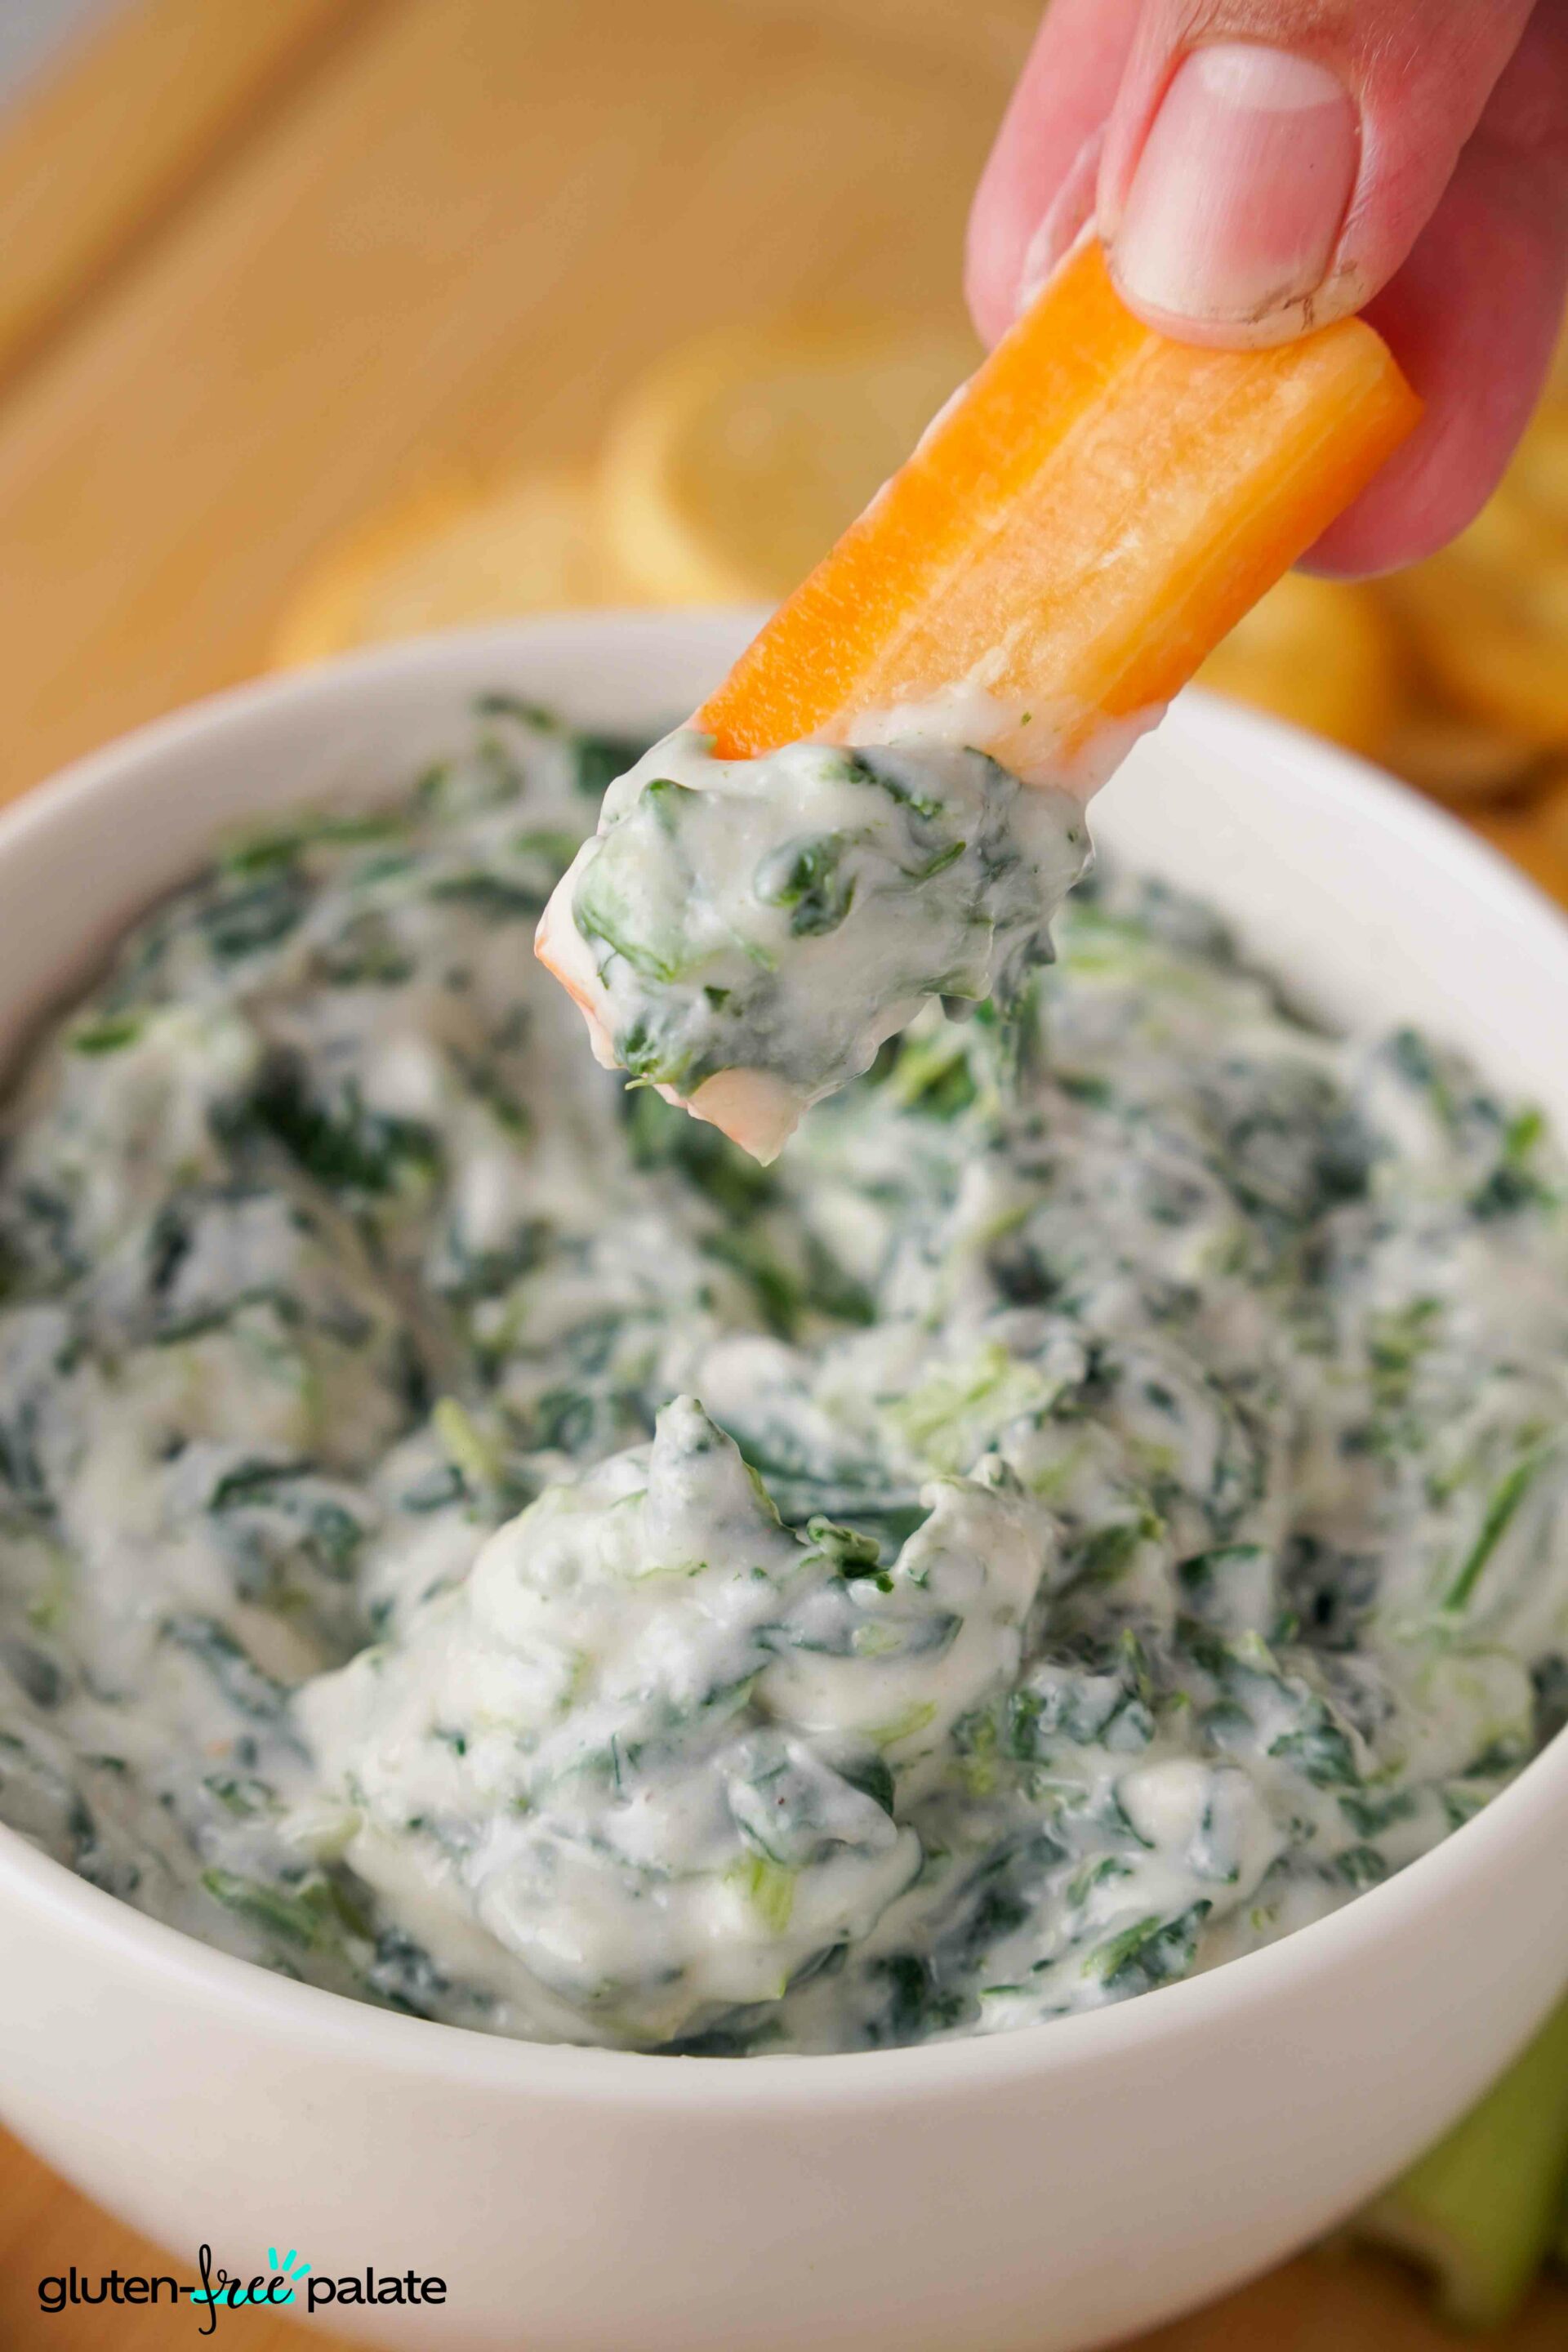 Spinach dip in a white bowl with a carrot being dipped into it.